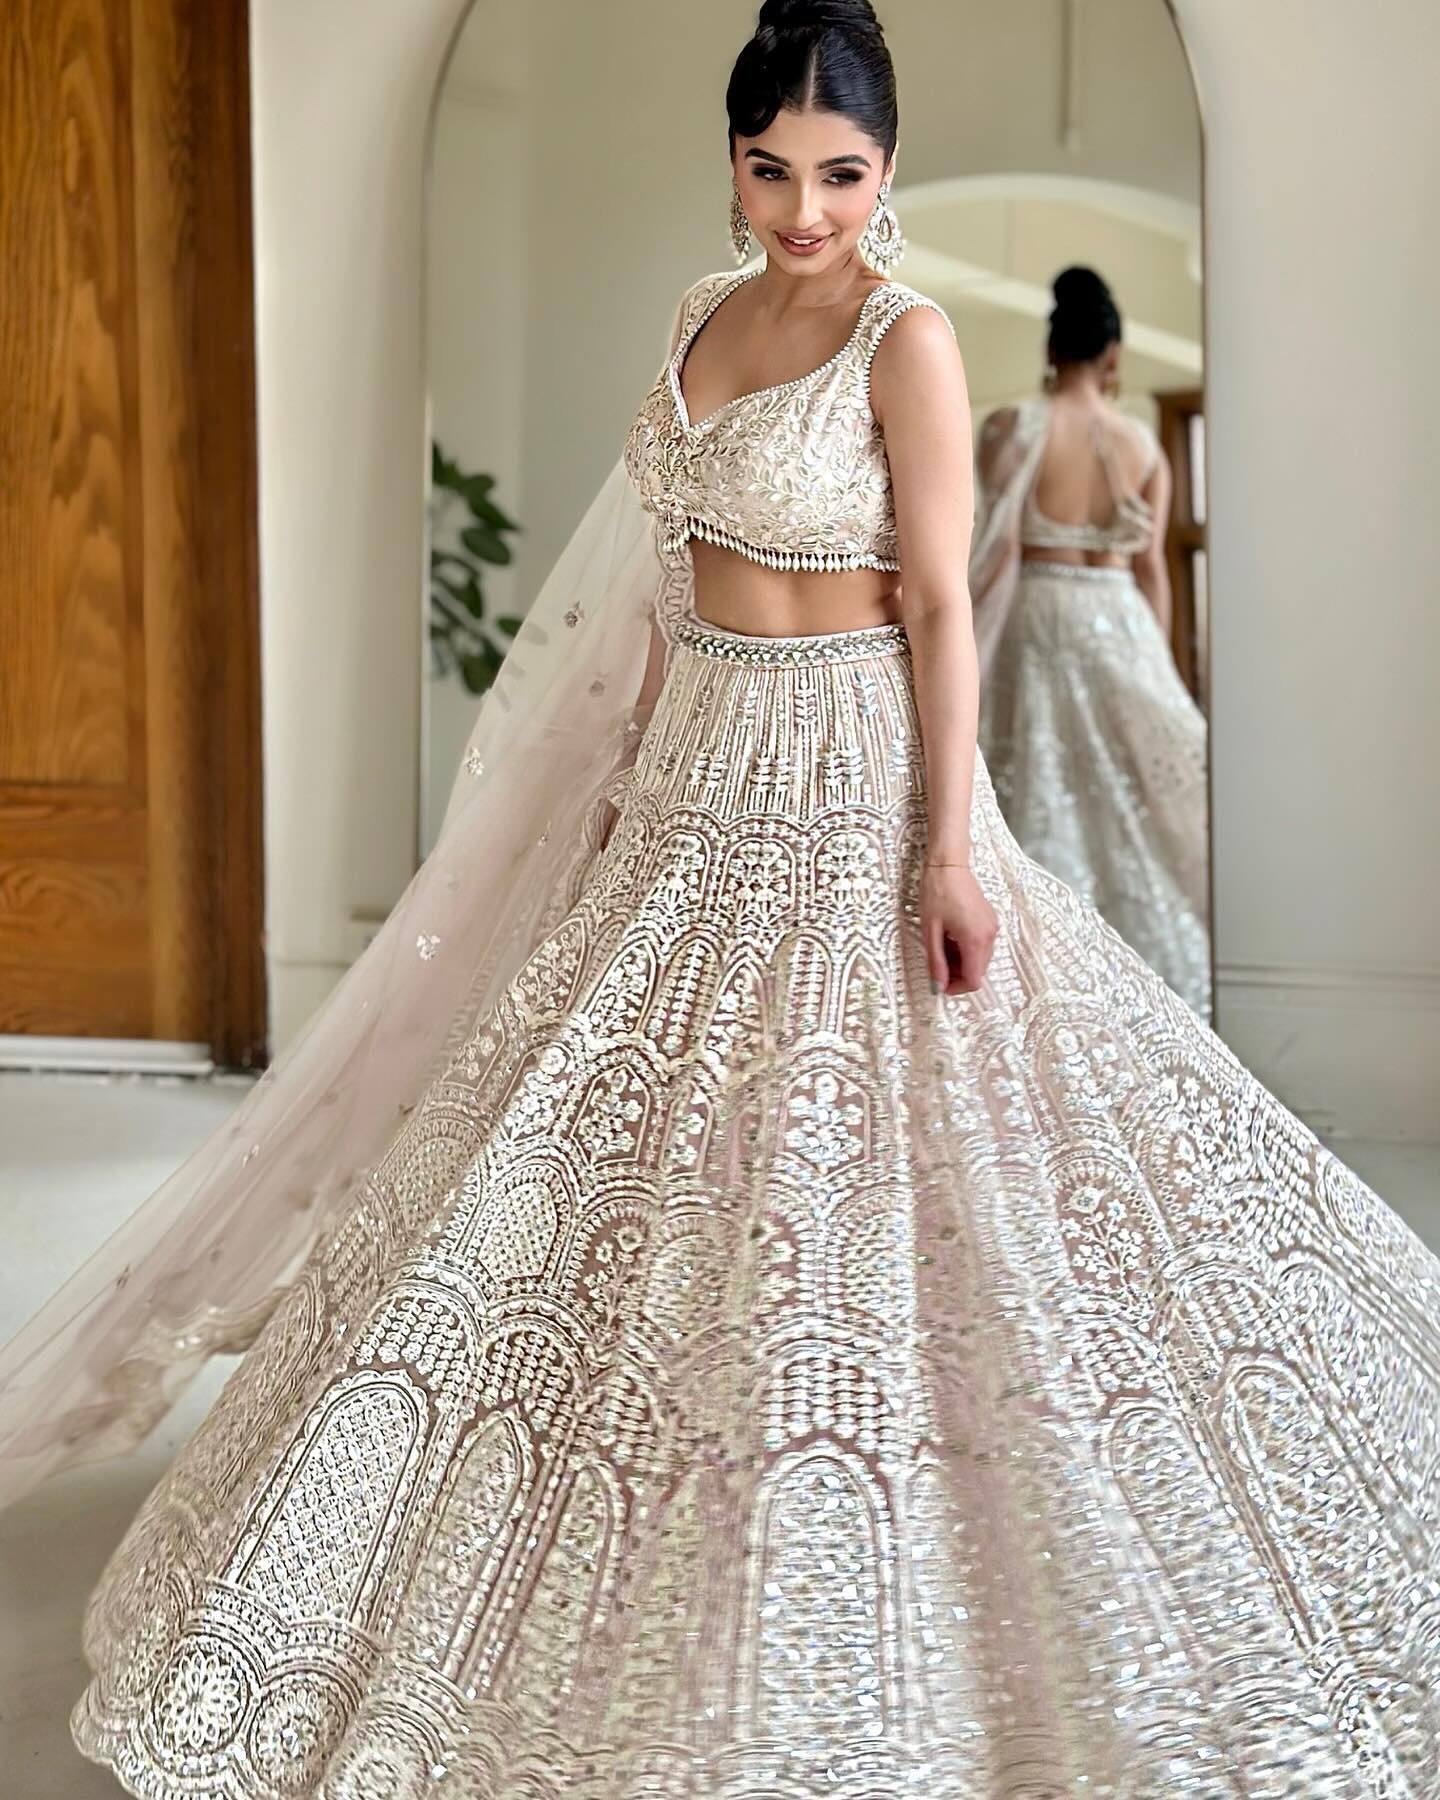 Always wanted to collab with Poonam! Love this look and this lengha! 

Hair and make up: @sharontaggarsekhon 
Outfit: @poonamskaurture 
Photo: @poonamskaurture 
Muse: @prabhjotbhullar

Book Bridal or non-bridal, please email info @madeinlondonstudio.